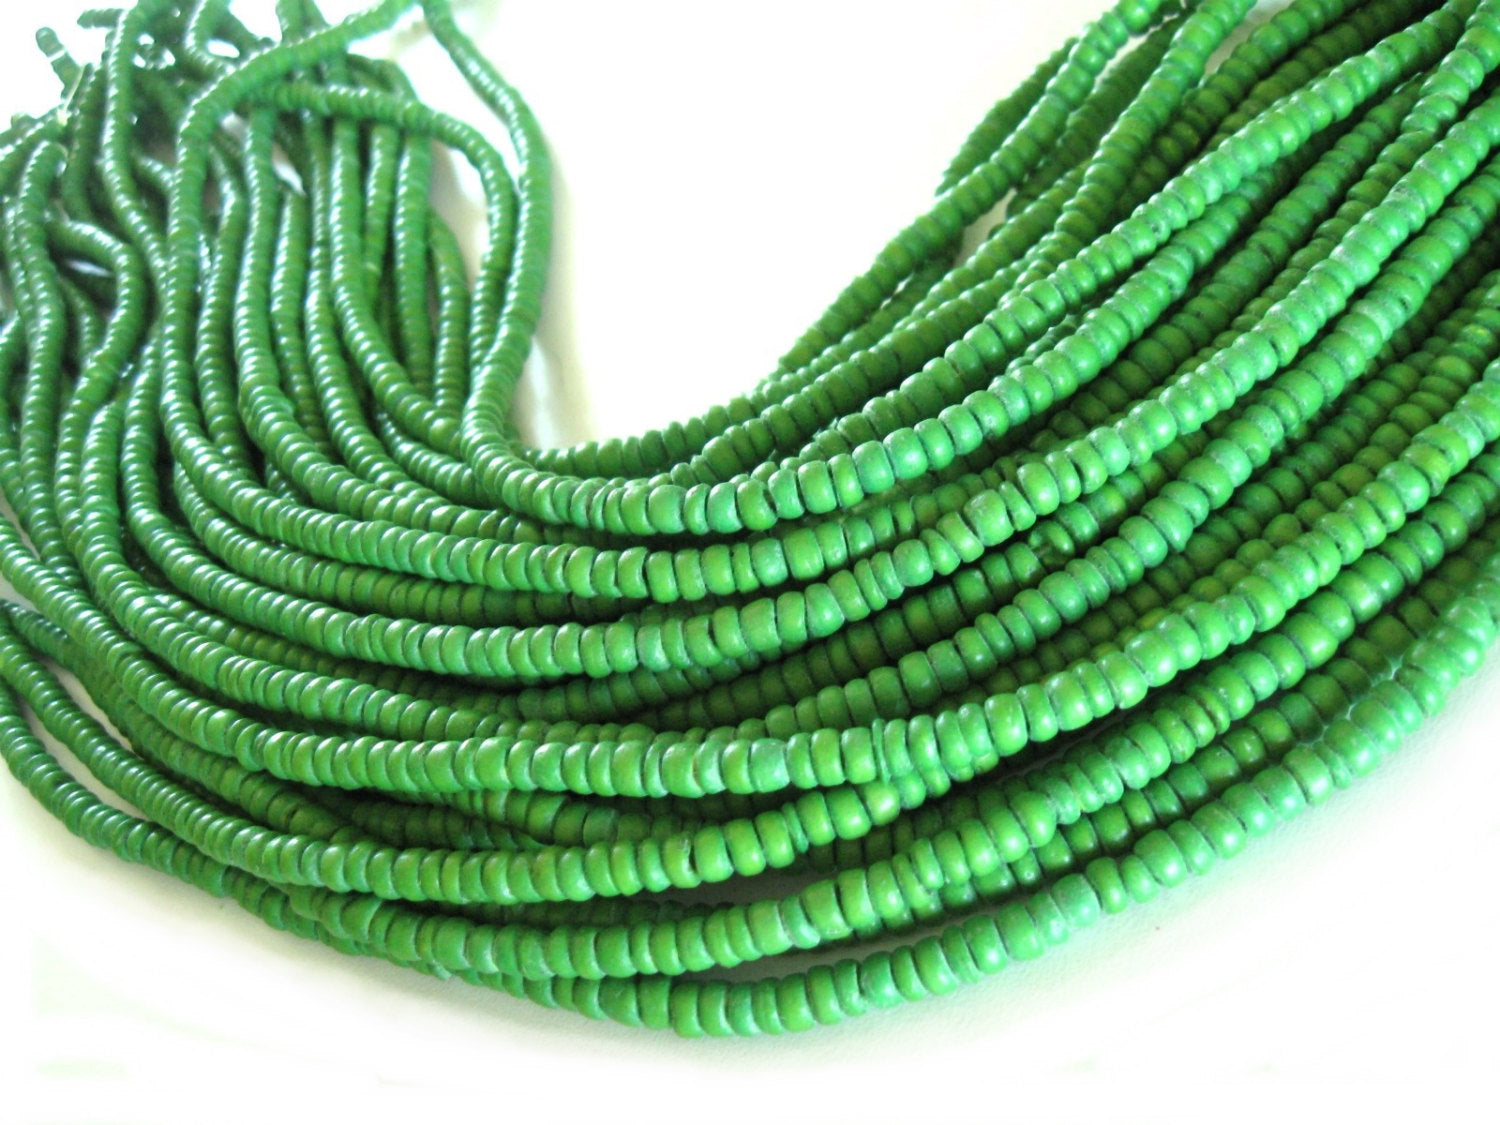 Coconut bead 120 lime green wood Beads - Coconut Rondelle Disk Beads 4-5mm